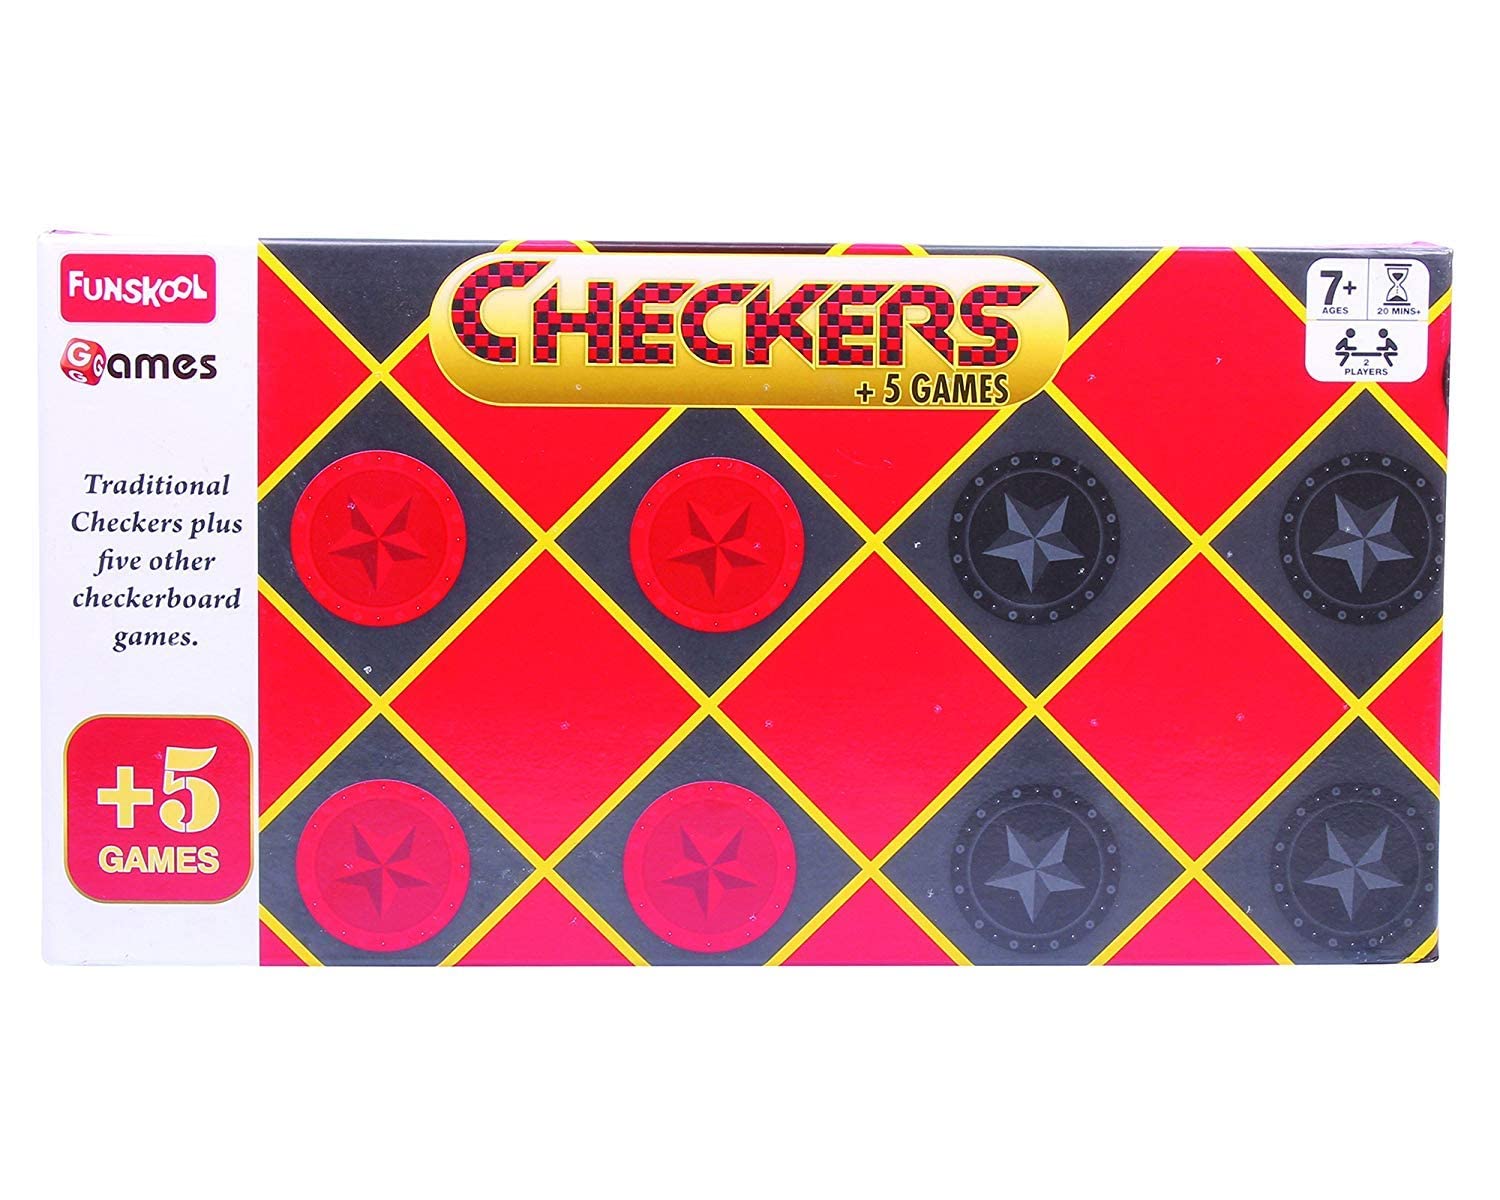 Funskool Games Checkers Plus 5, 5 in 1 checkers board games